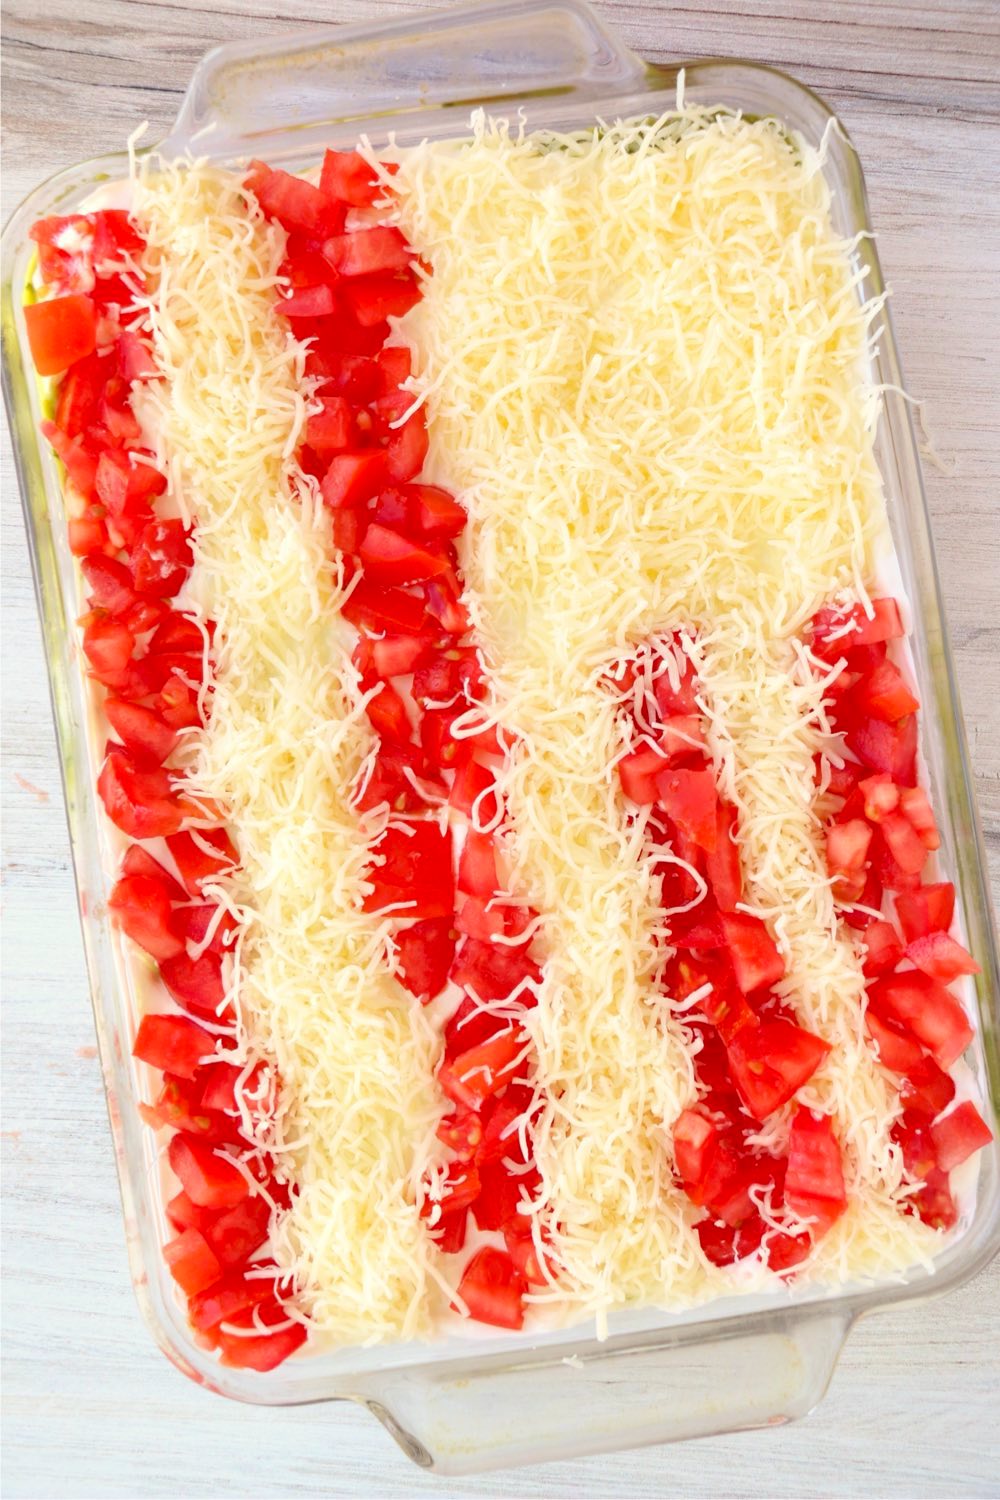 tomatoes and cheese in the design of an American flag